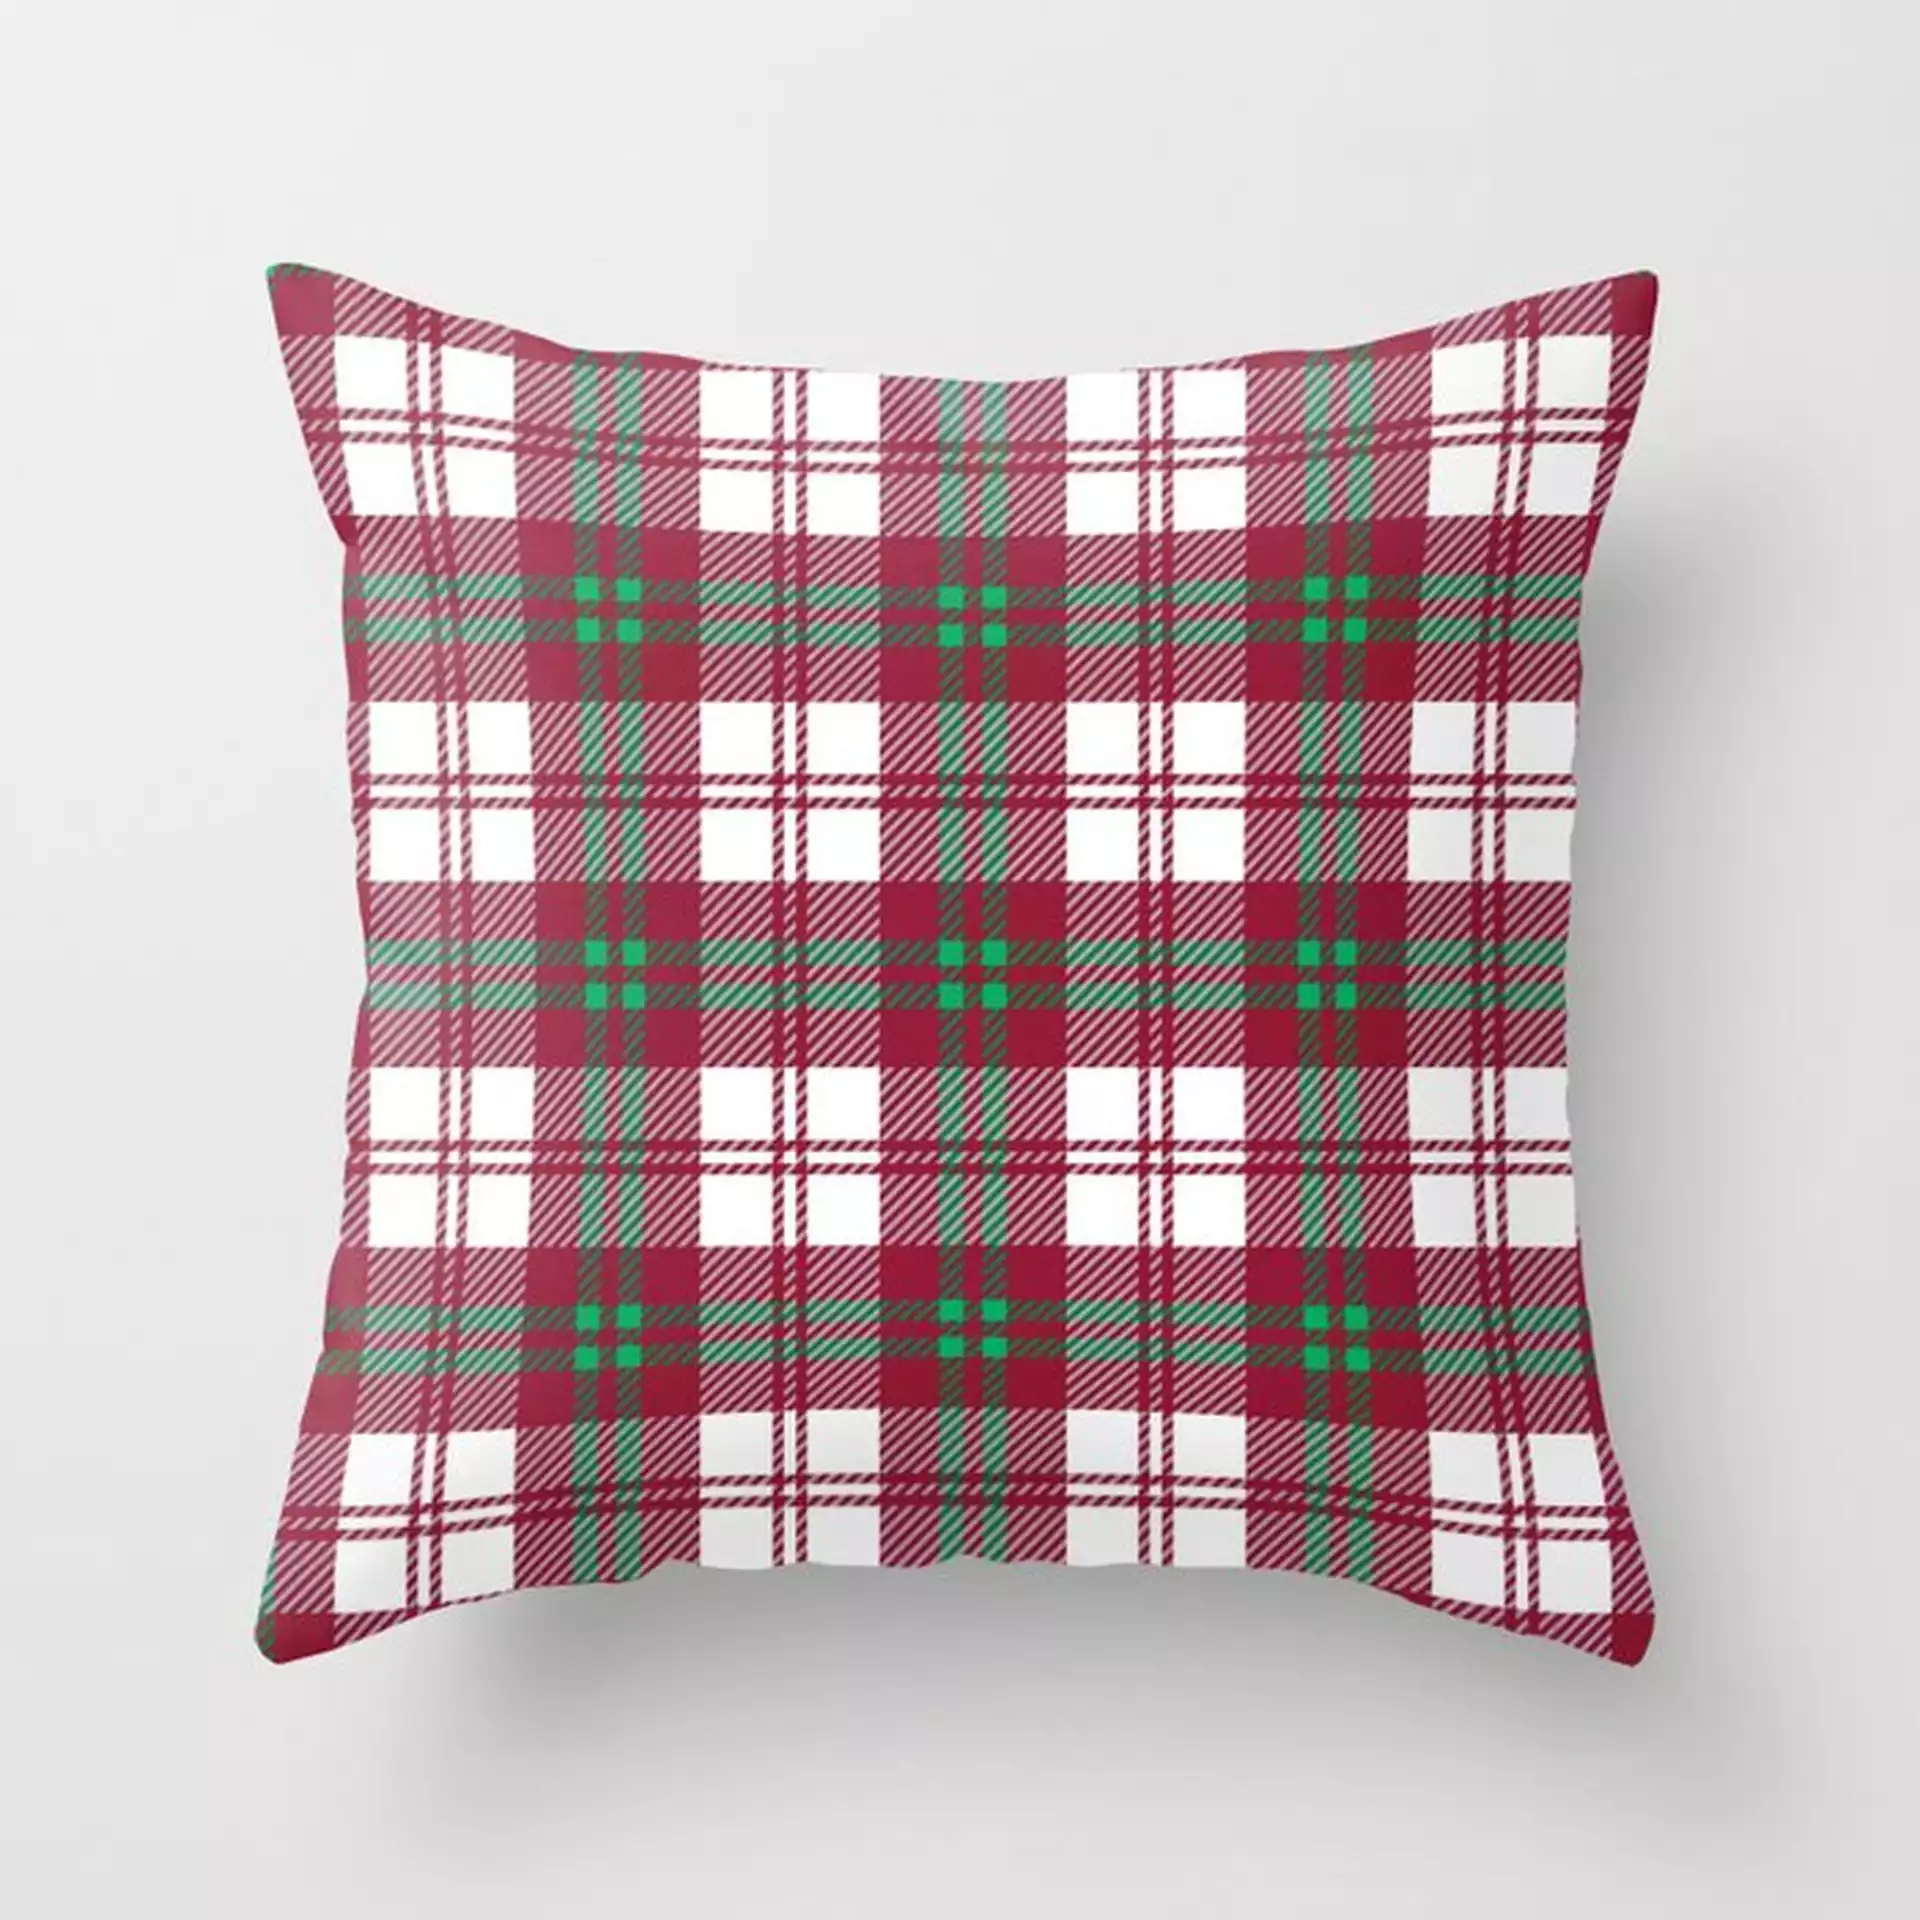 Cozy Plaid In Red And Green Couch Throw Pillow by Becky Bailey - Cover (16" x 16") with pillow insert - Indoor Pillow